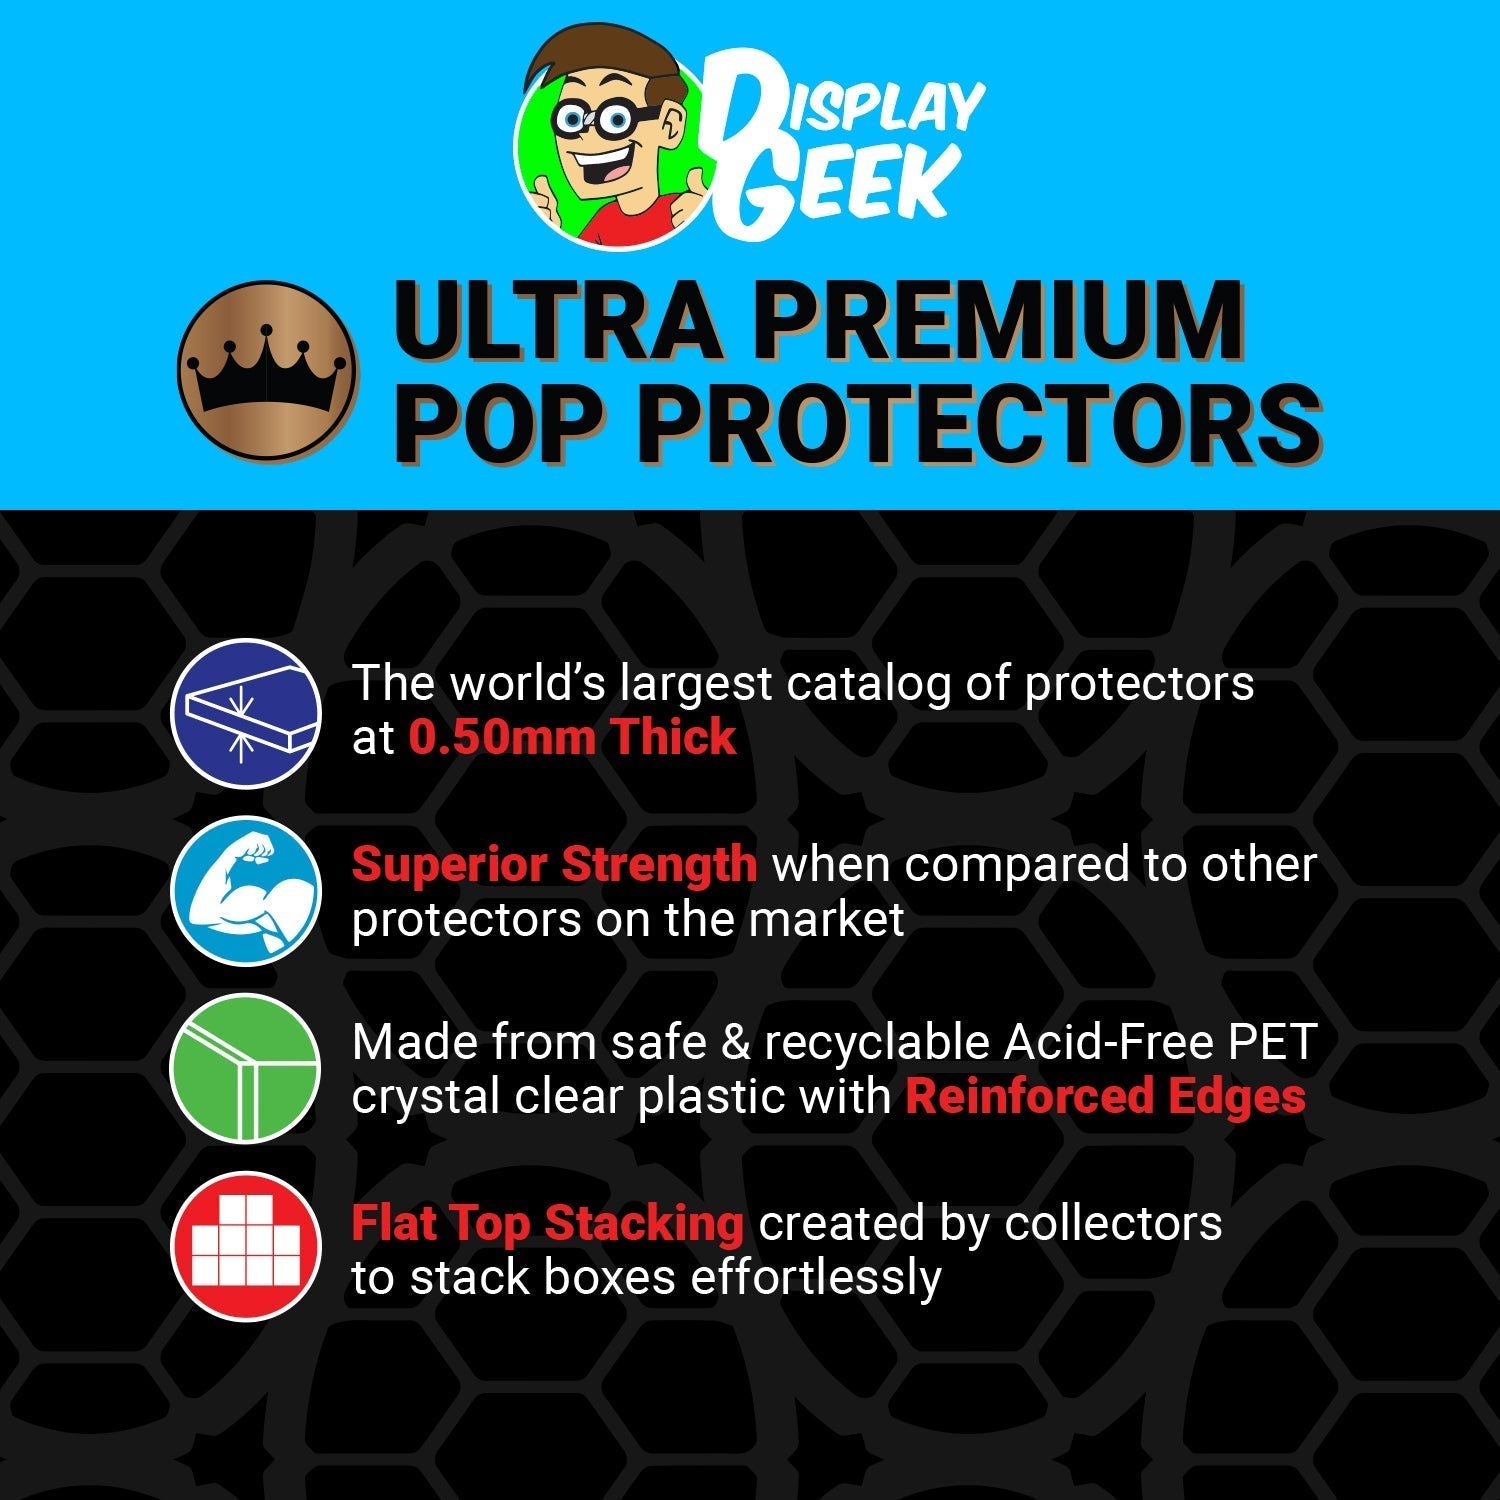 Pop Protector for Def Leppard Hysteria #37 Funko Pop Albums Deluxe - PPG Pop Protector Guide Search Created by Display Geek